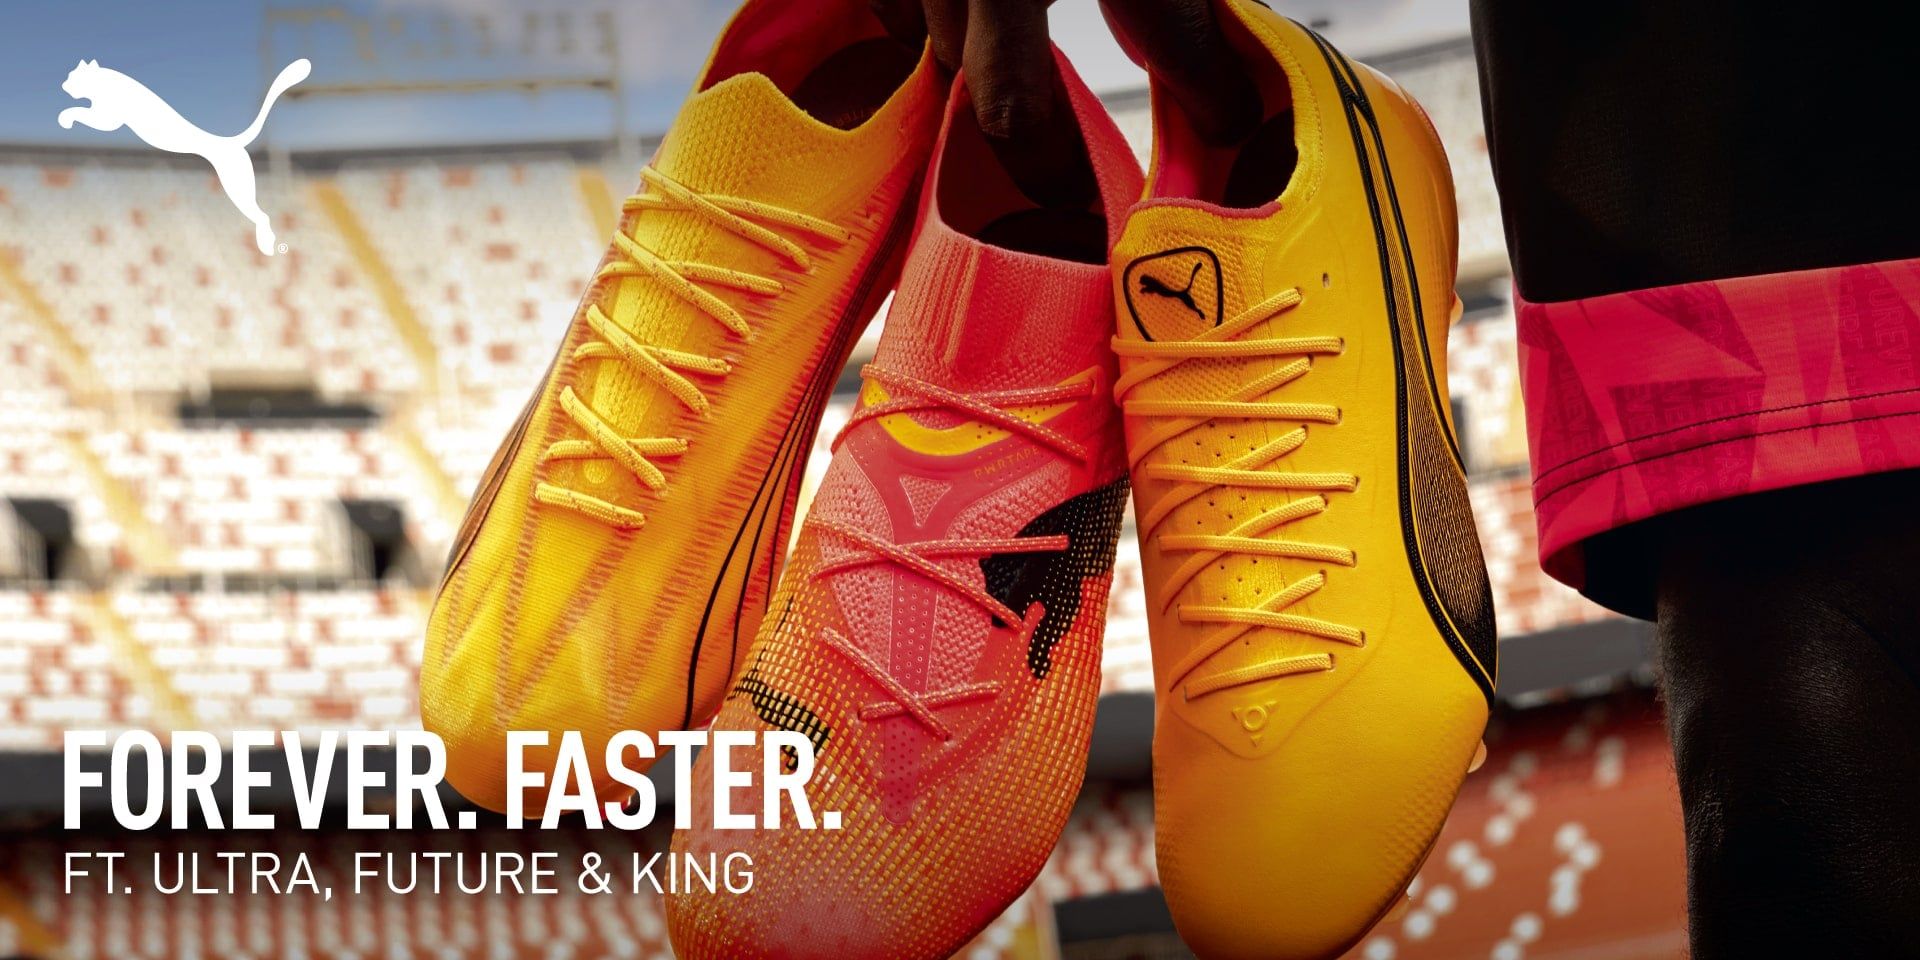 BST ‘Forever Faster’ - PUMA